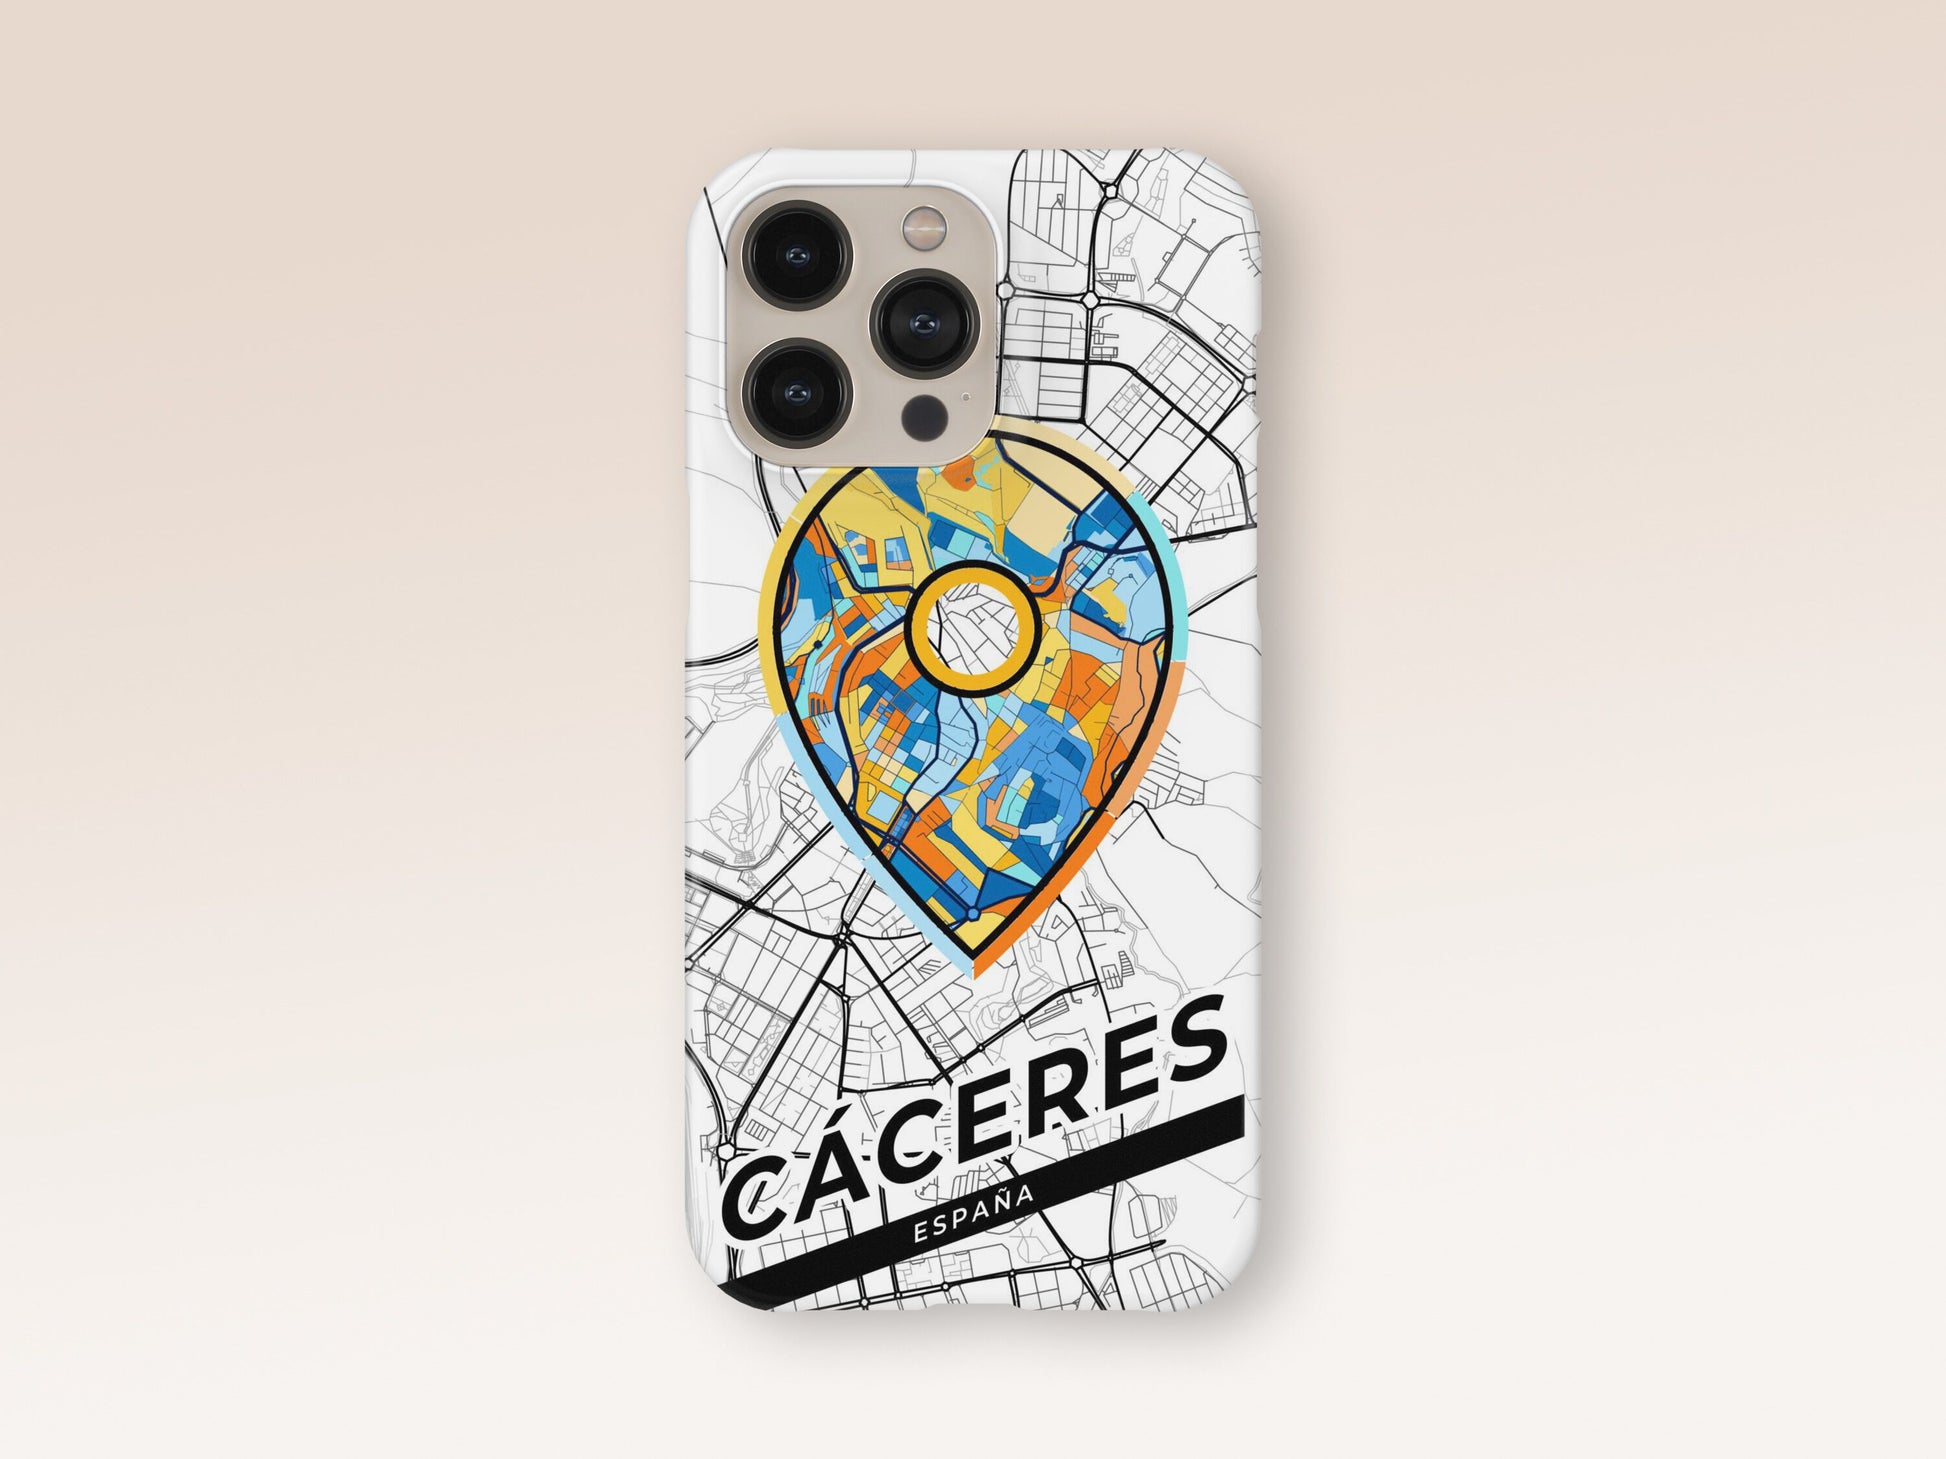 Cáceres Spain slim phone case with colorful icon. Birthday, wedding or housewarming gift. Couple match cases. 1